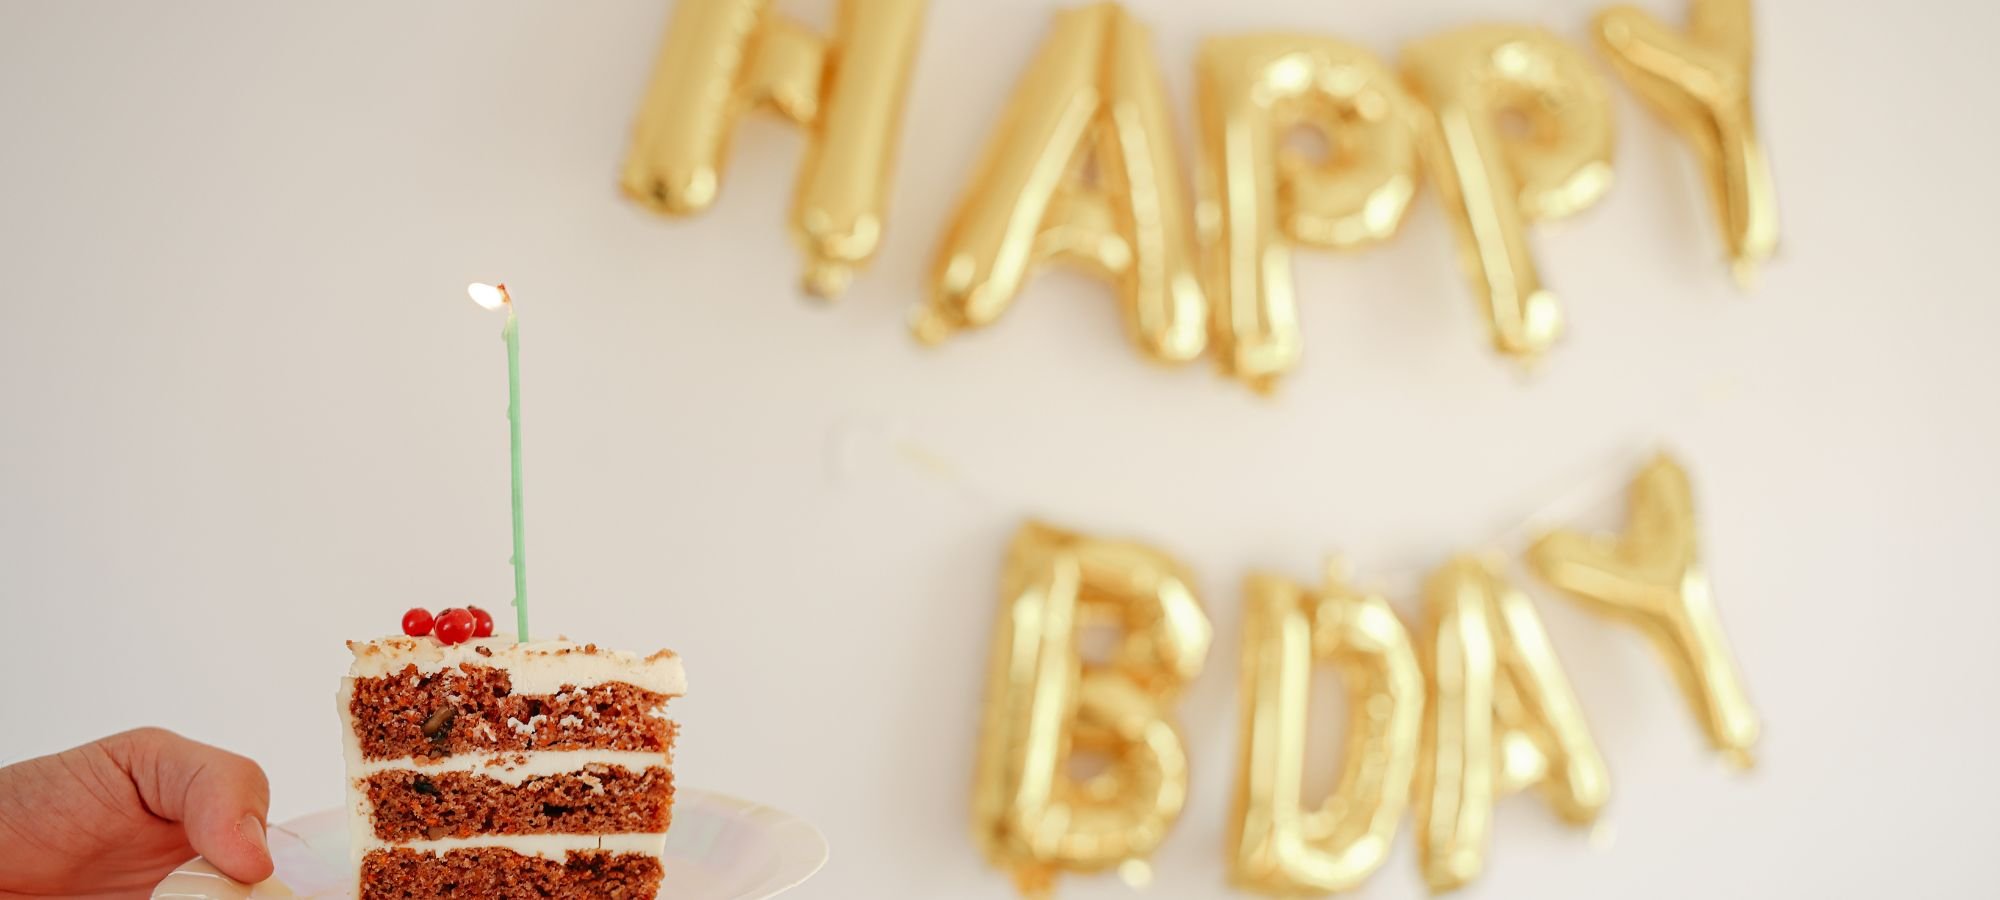 How to say happy birthday in different languages